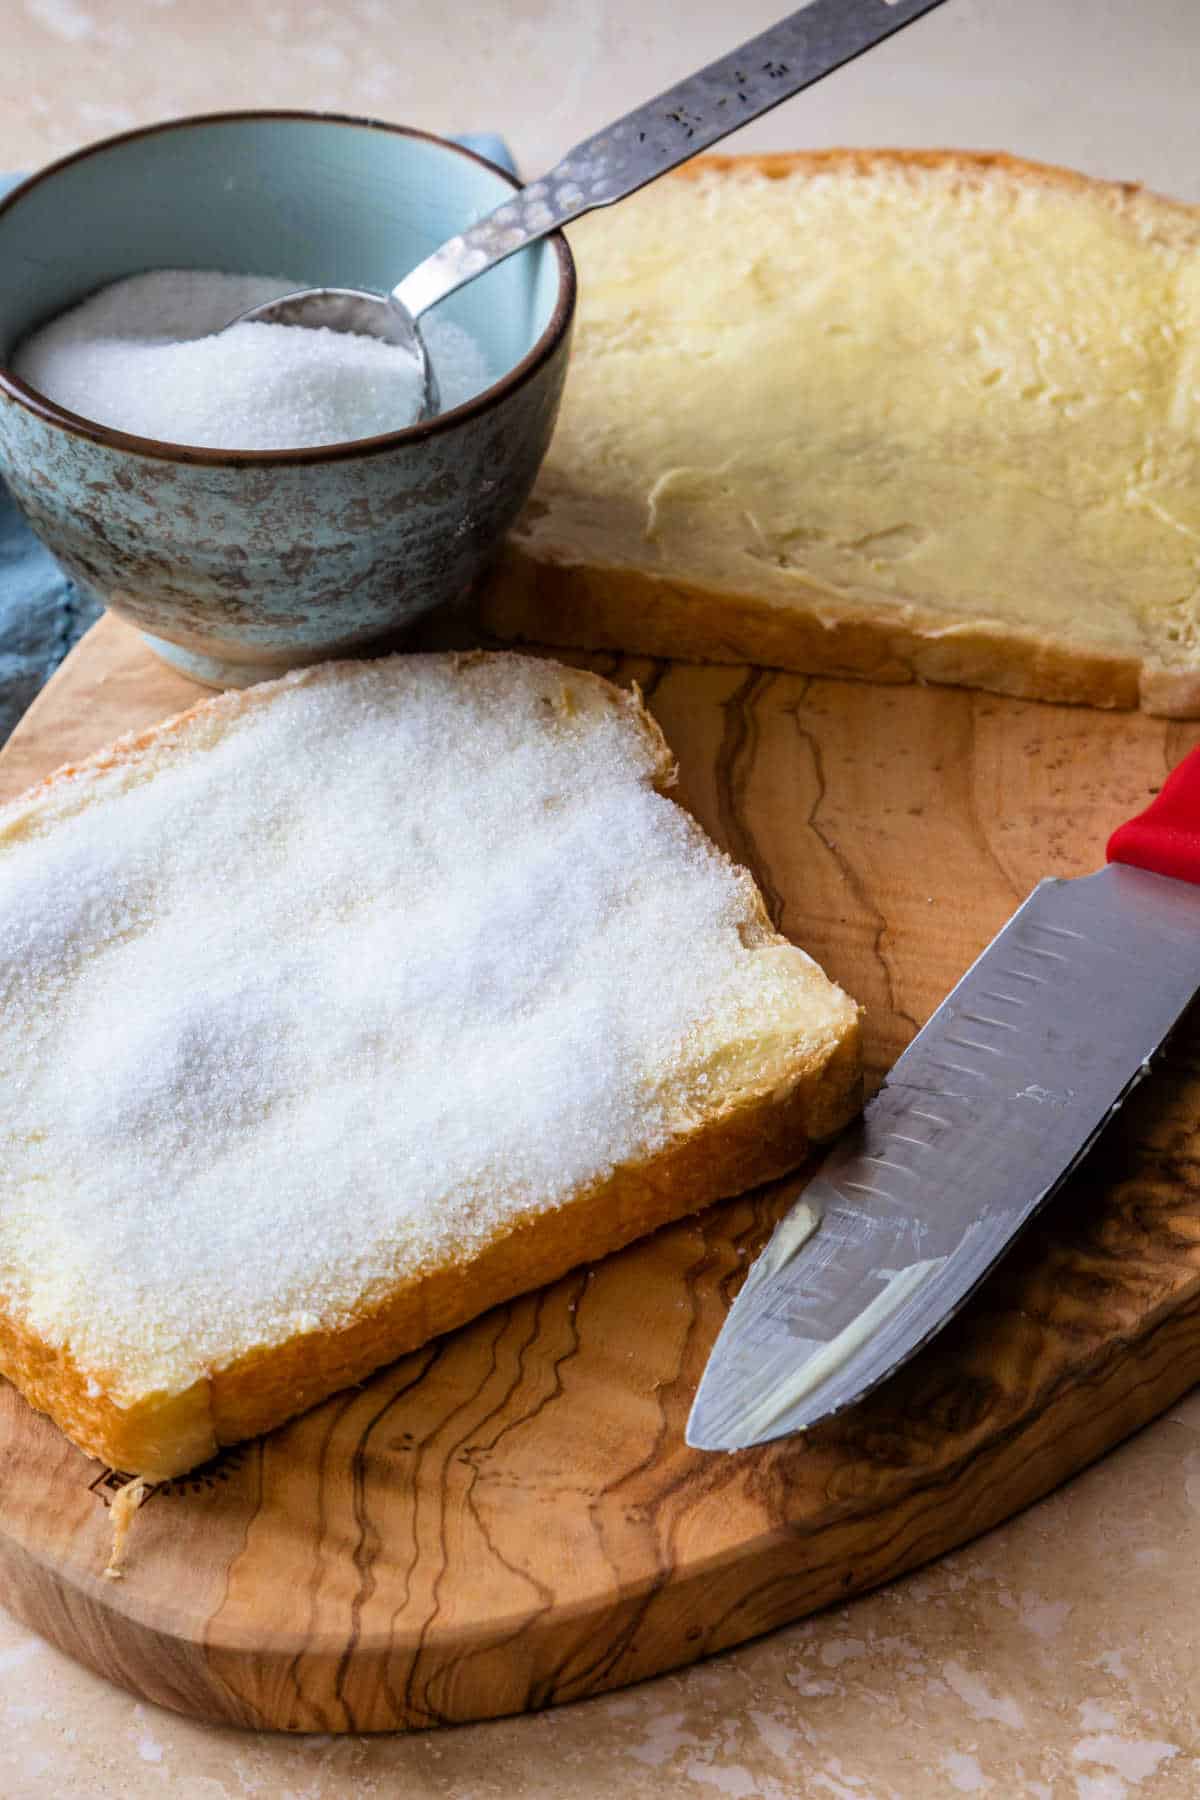 Aslice of bread completely covered with a layer of granulated sugar, another slice slathered in butter, a spreading knife, and a small blue bowl with sugar in it.